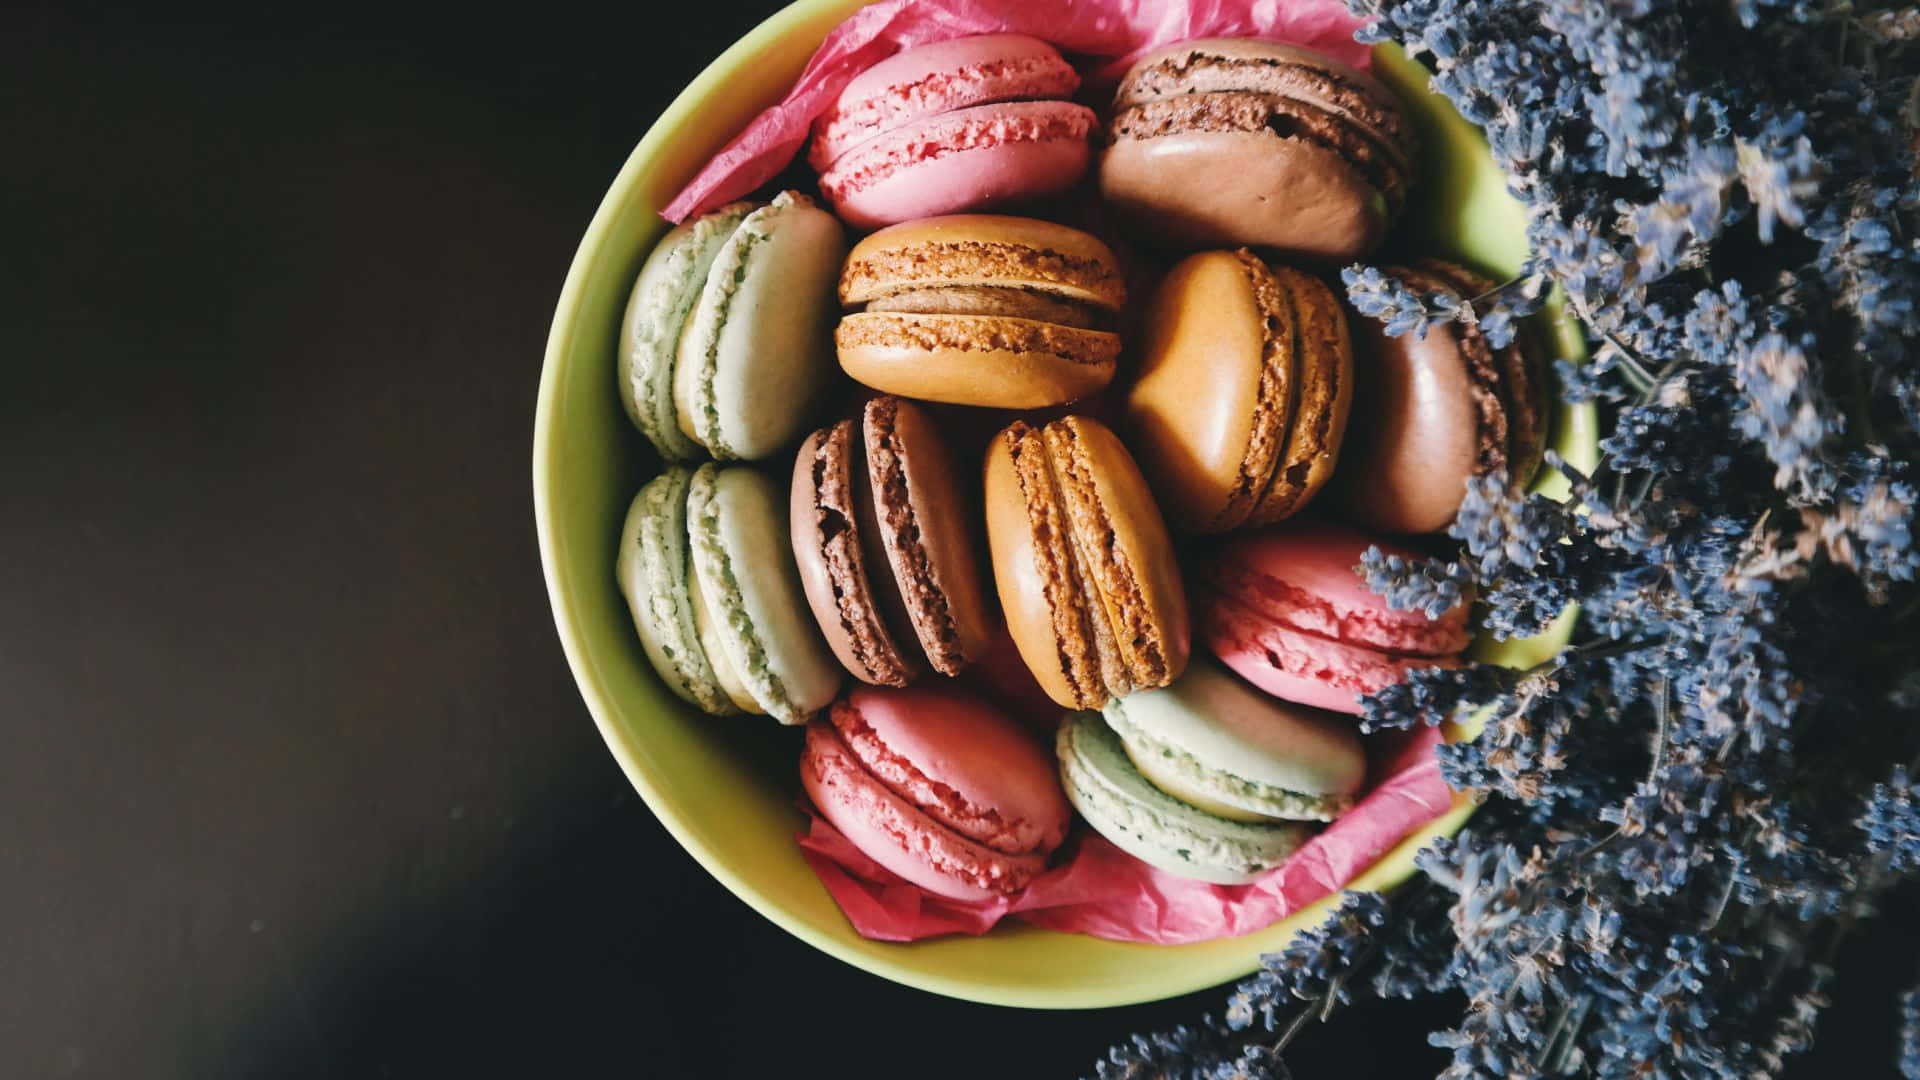 Yummy Macaroons In A Bowl